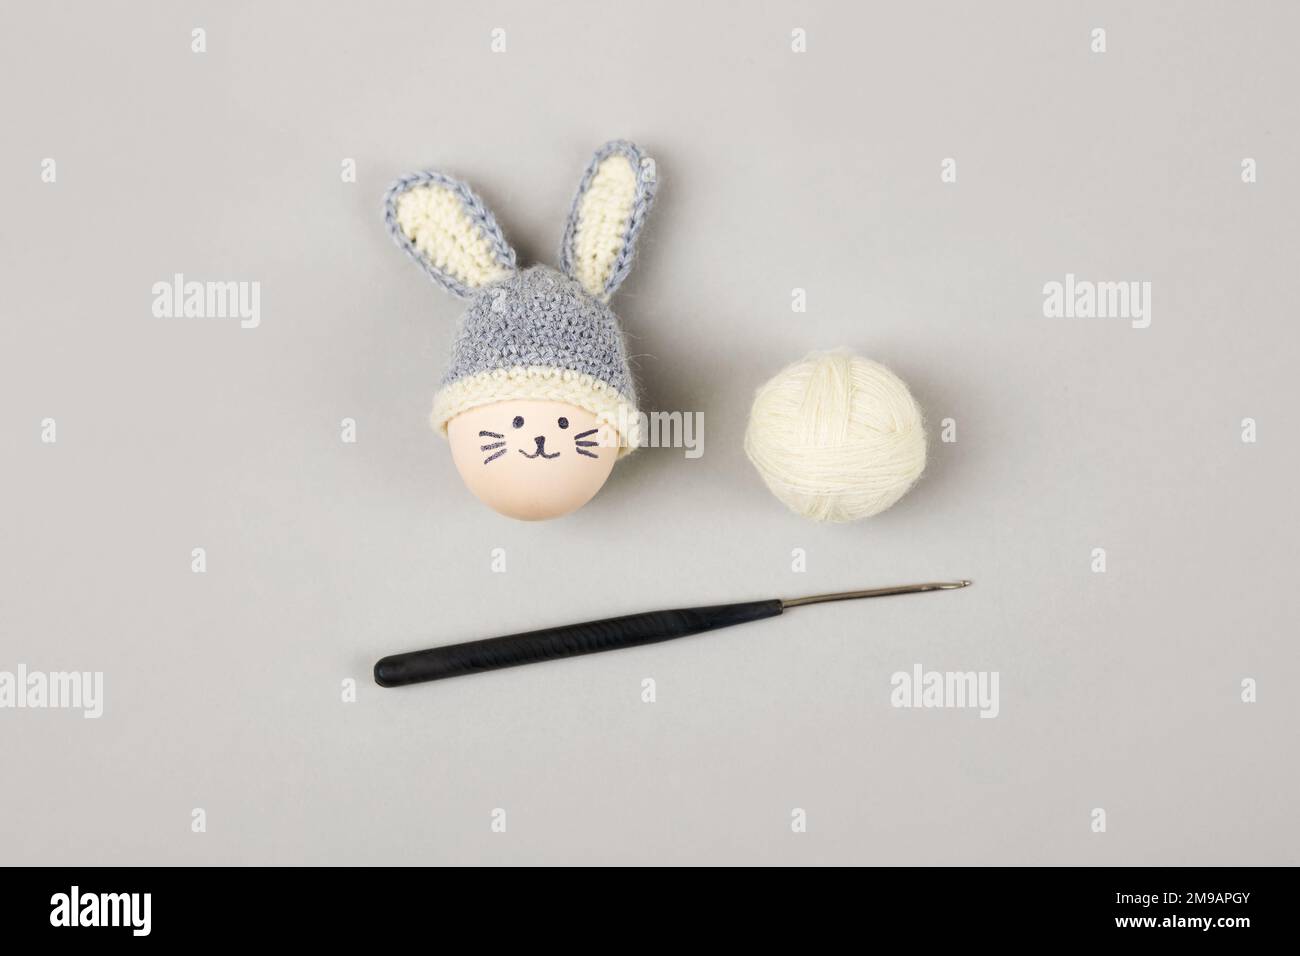 Easter egg with funny face and gray crocheted hat with bunny ears with a balls of thread and a crochet hook on a gray background. Stock Photo